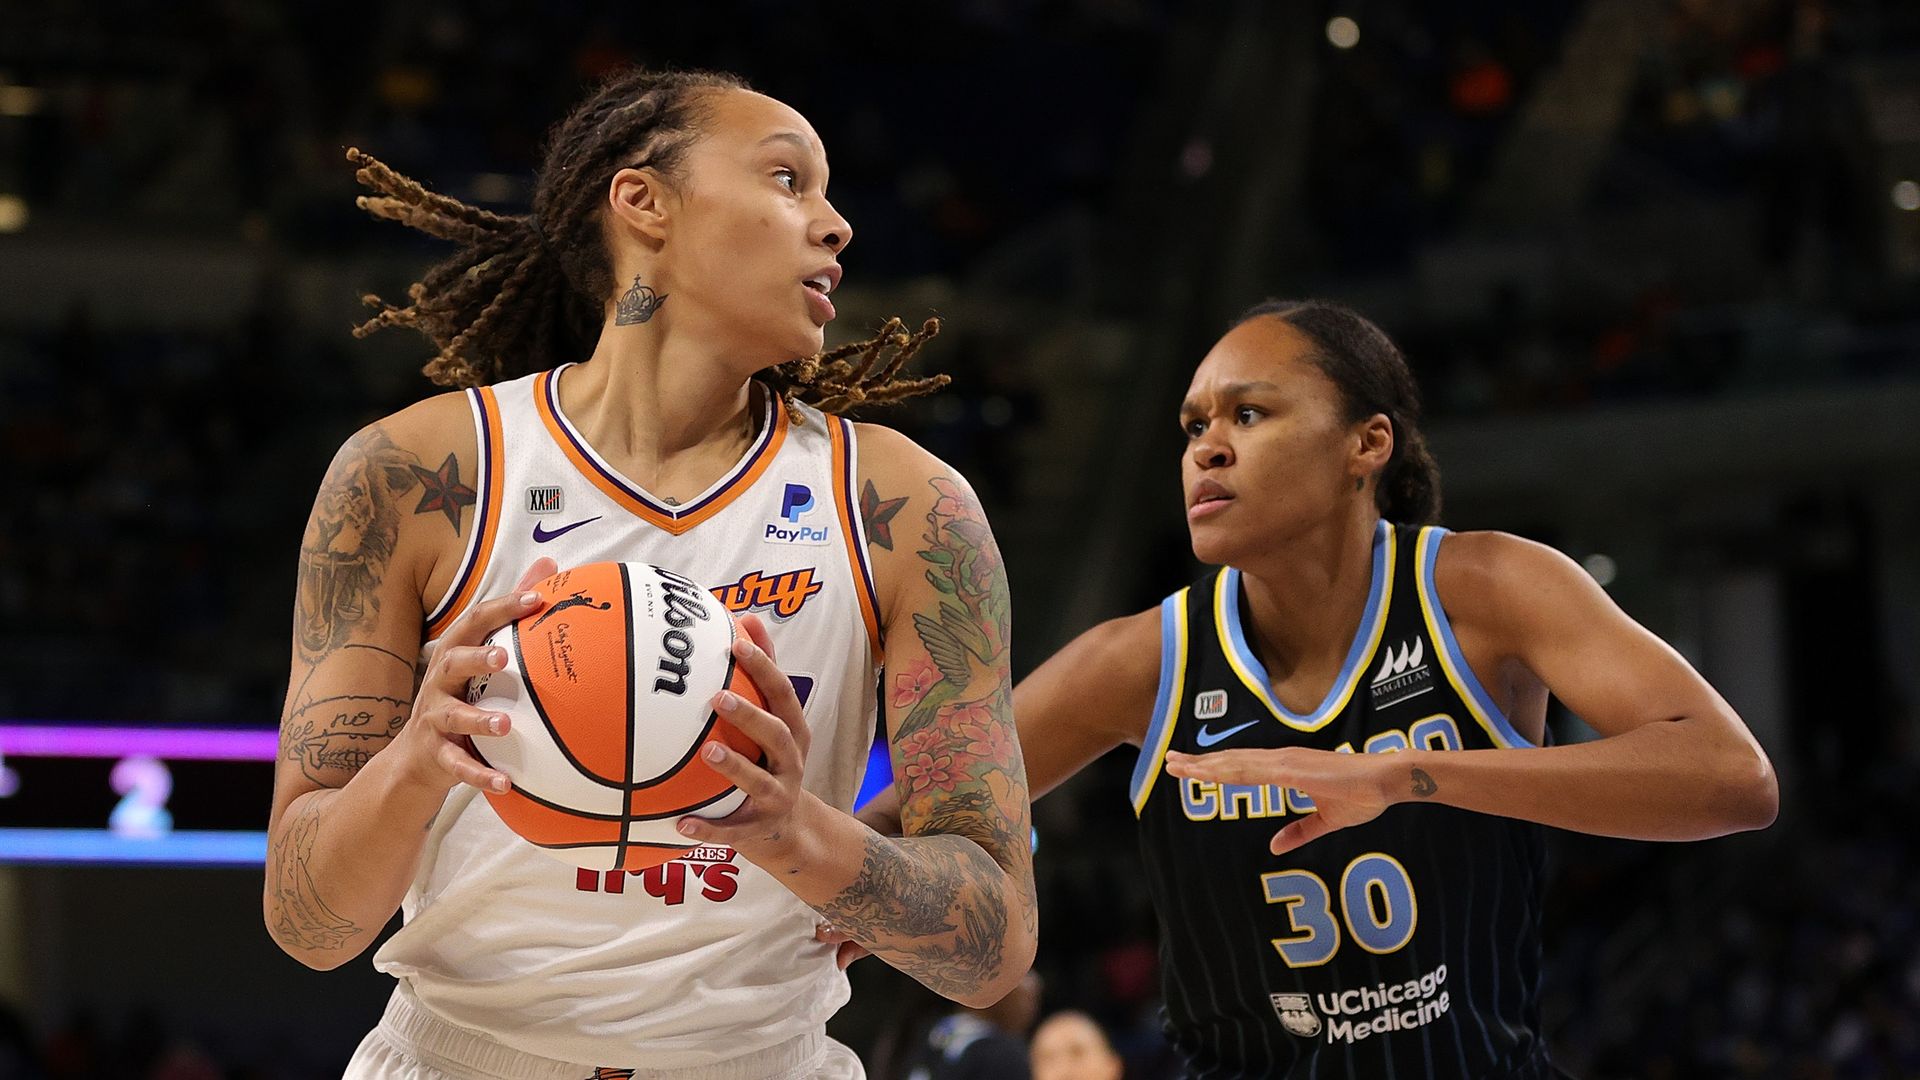 WNBA Star Brittney Griner detained in Russia as Mercury opens